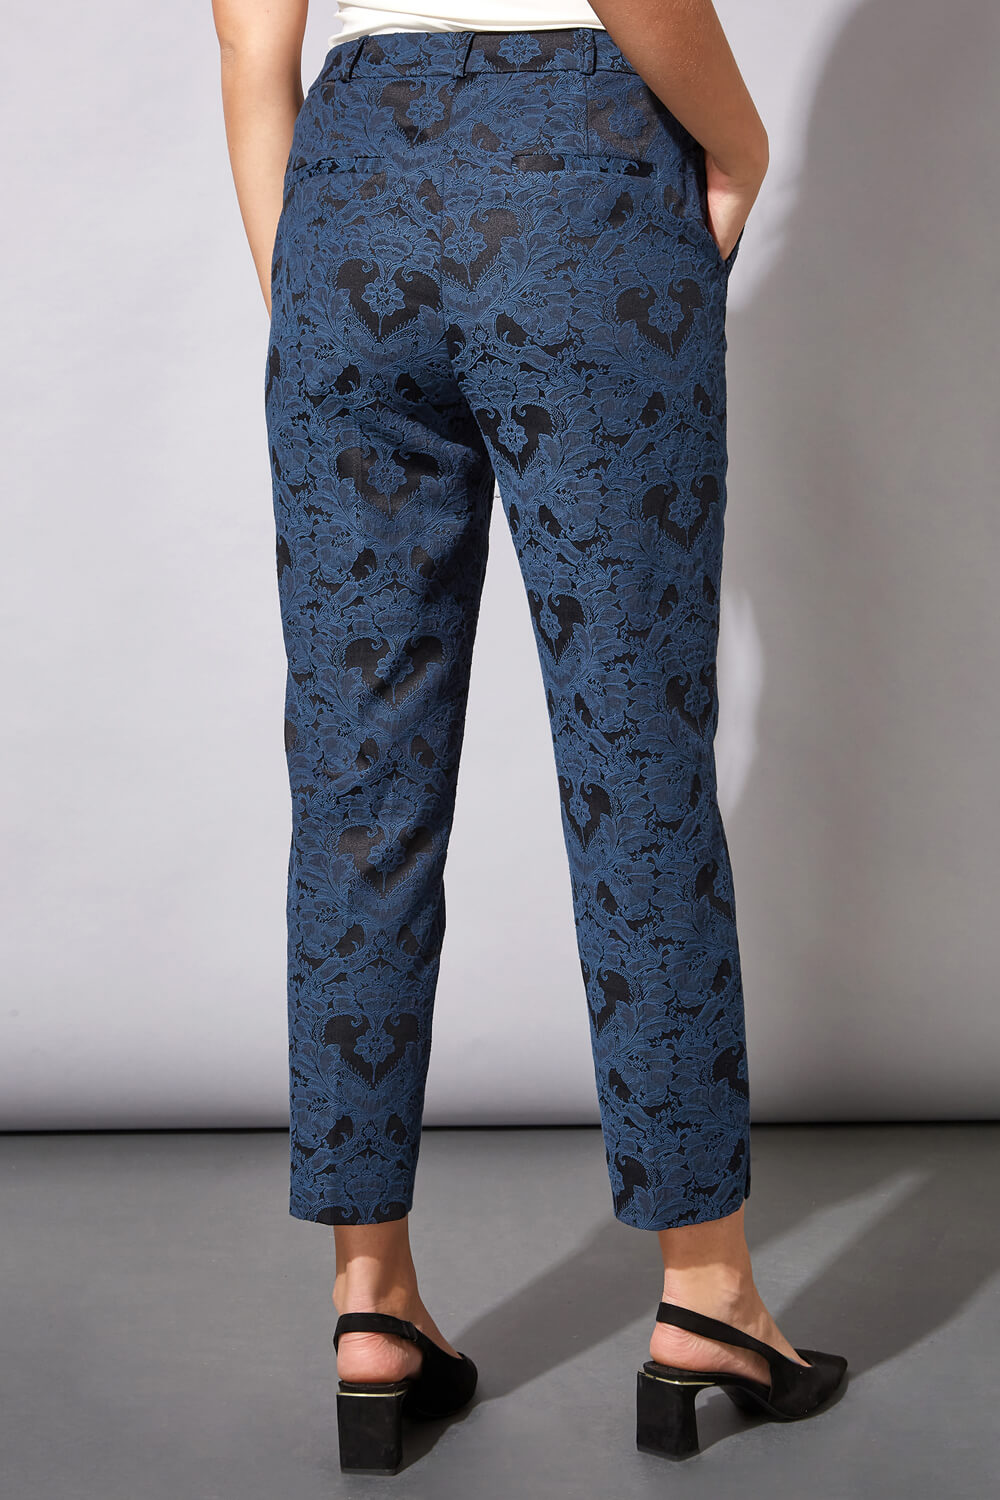 Midnight Blue Jacquard Tapered Trouser, Image 2 of 4